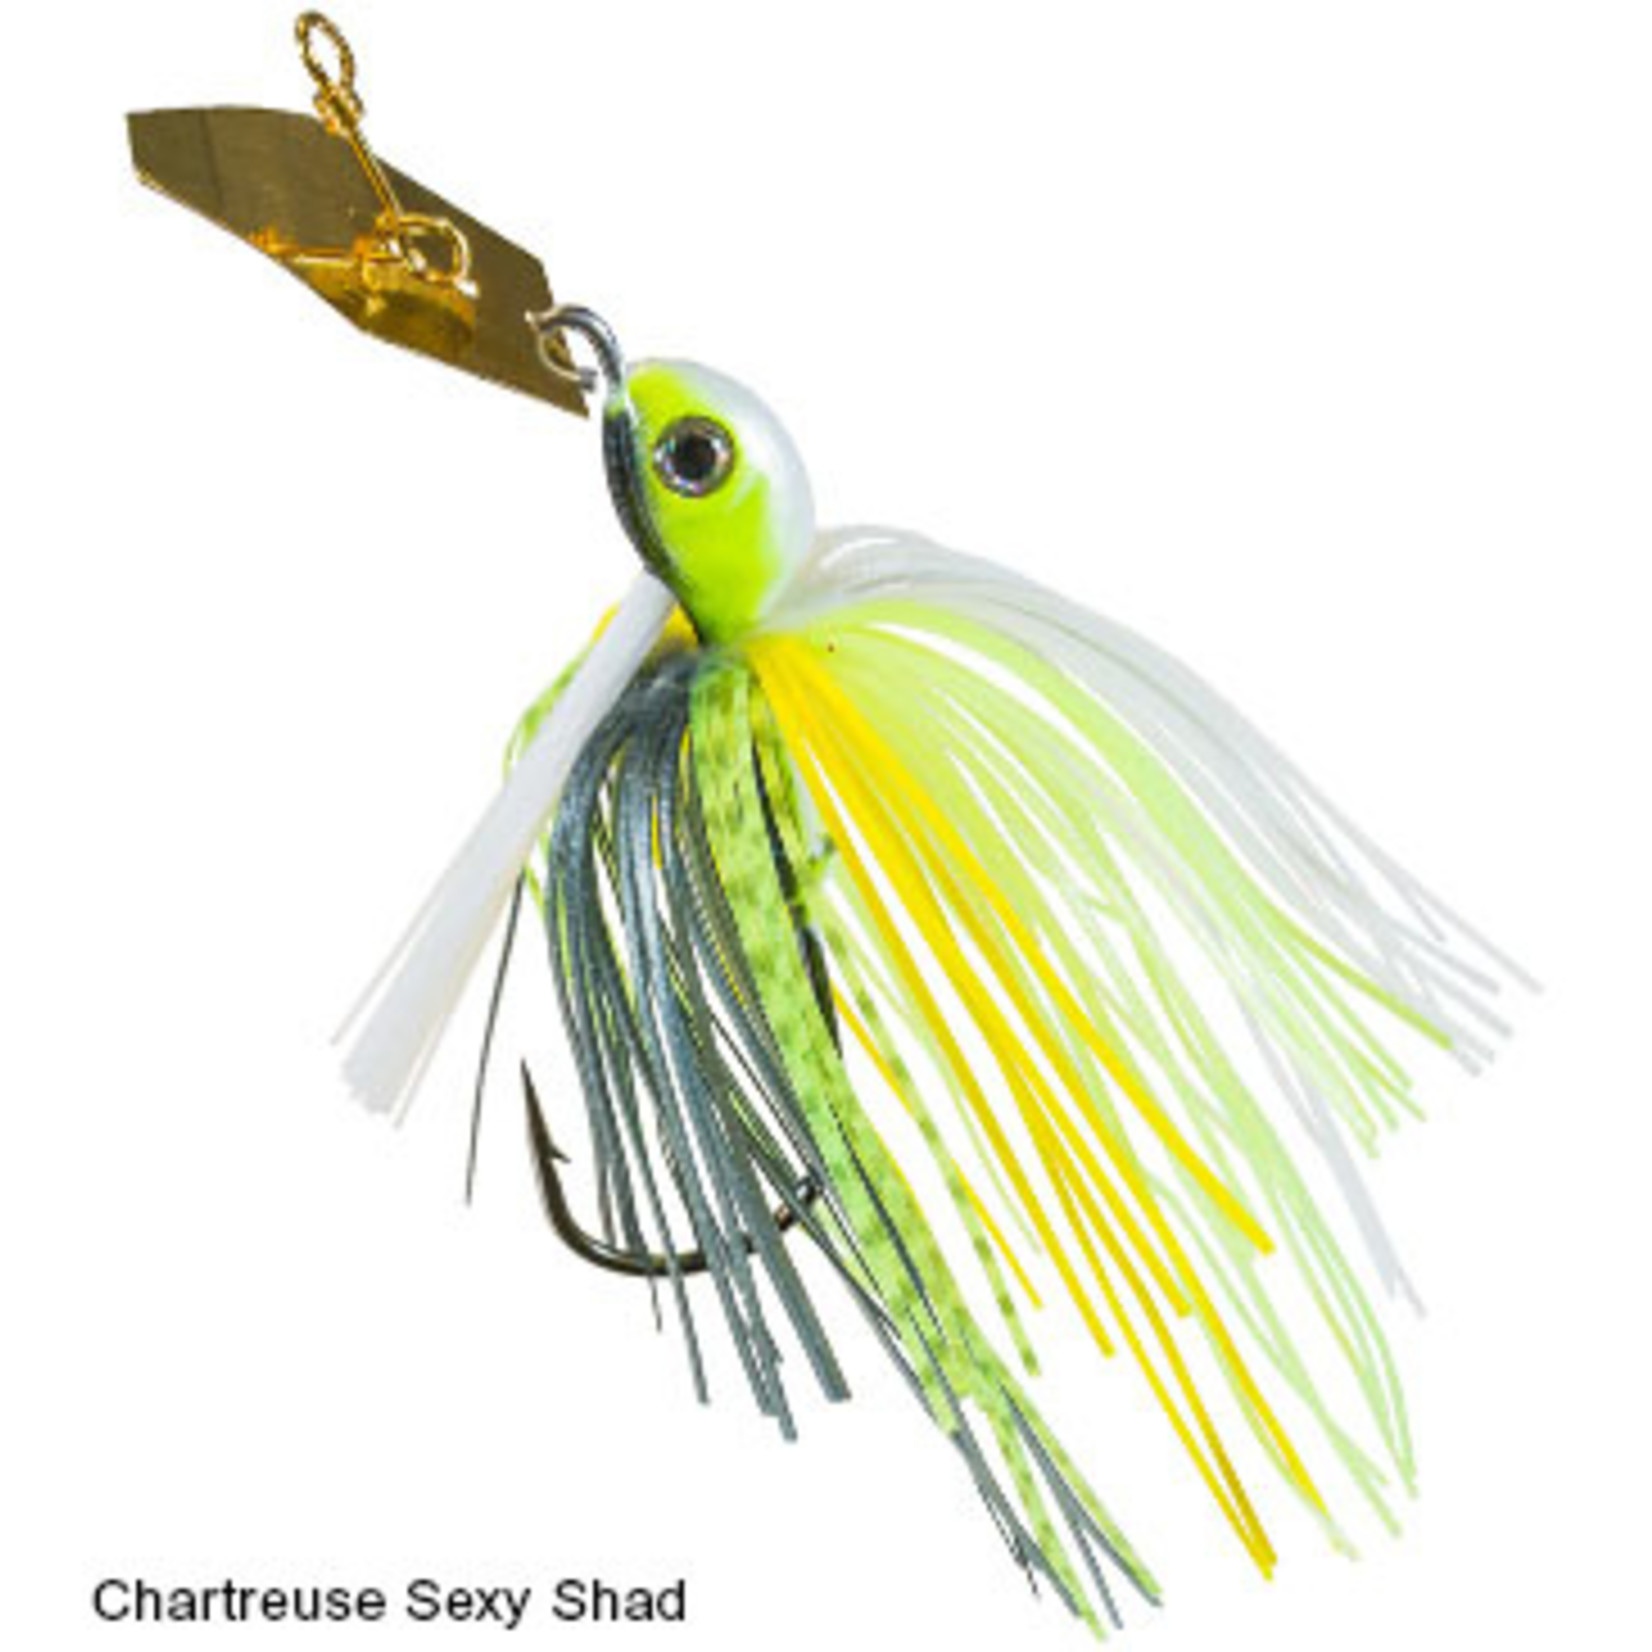 Z-MAN | Weedless Project Z Chatter Bait 3/8oz "Chartreuse Sexy Shad"